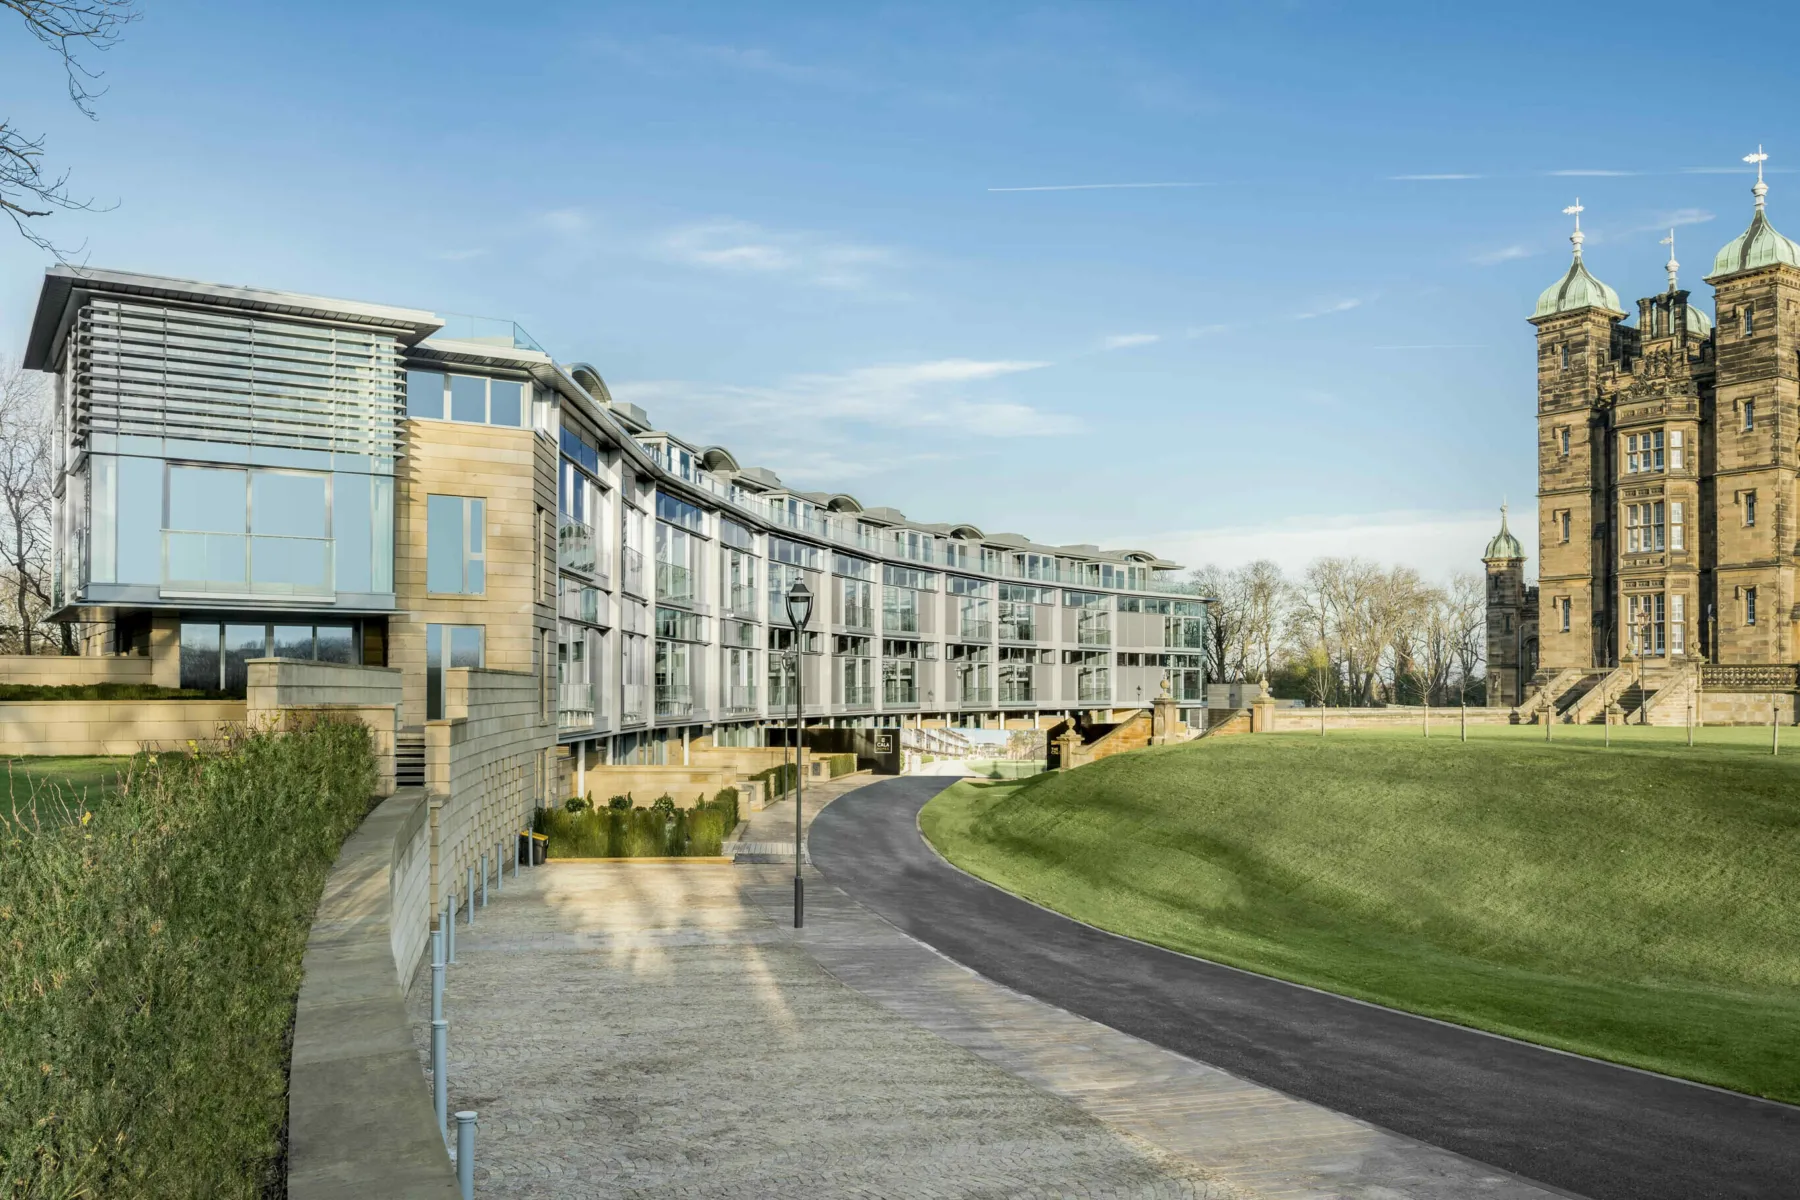 Exterior view of The Crescent at Donaldson's College, Edinburgh. A contemporary curve of apartments in glass and sandstone with three storeys plus penthouse. The building is set beside terraced lawns with corner towers of the original college building just seen